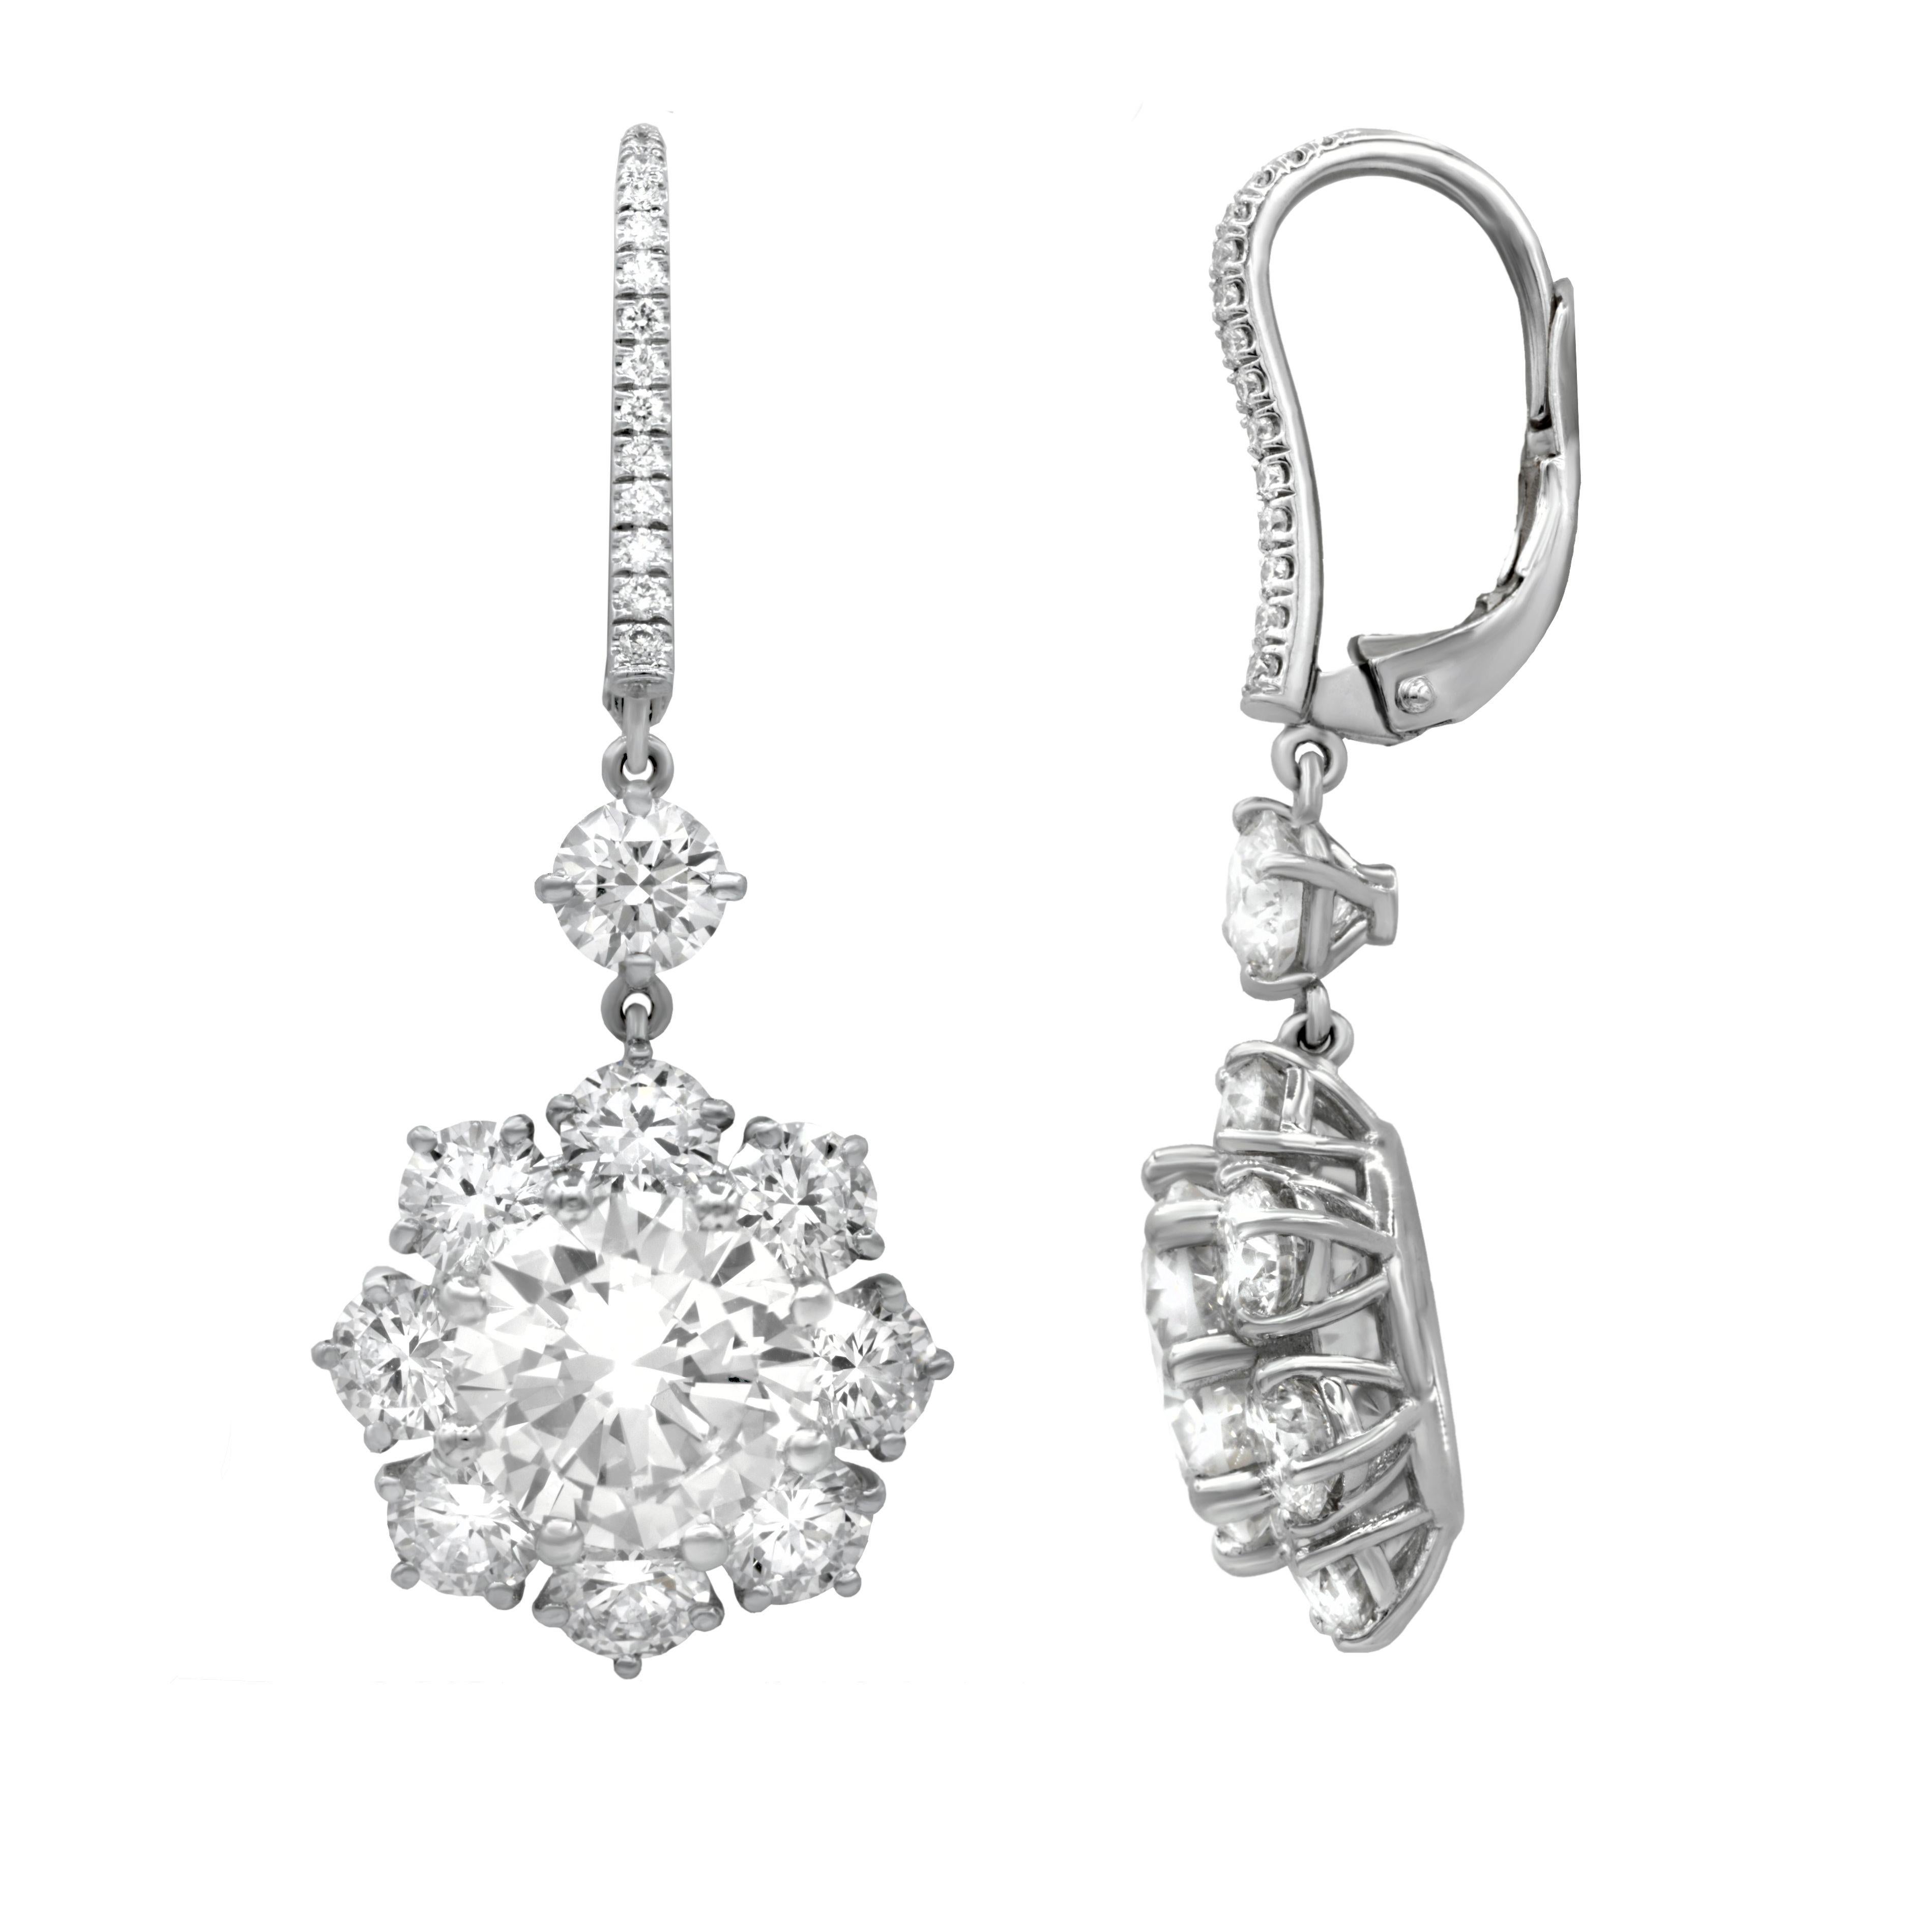 Round Cut Magnificent 12.17 Carat Round Diamond Earrings For Sale